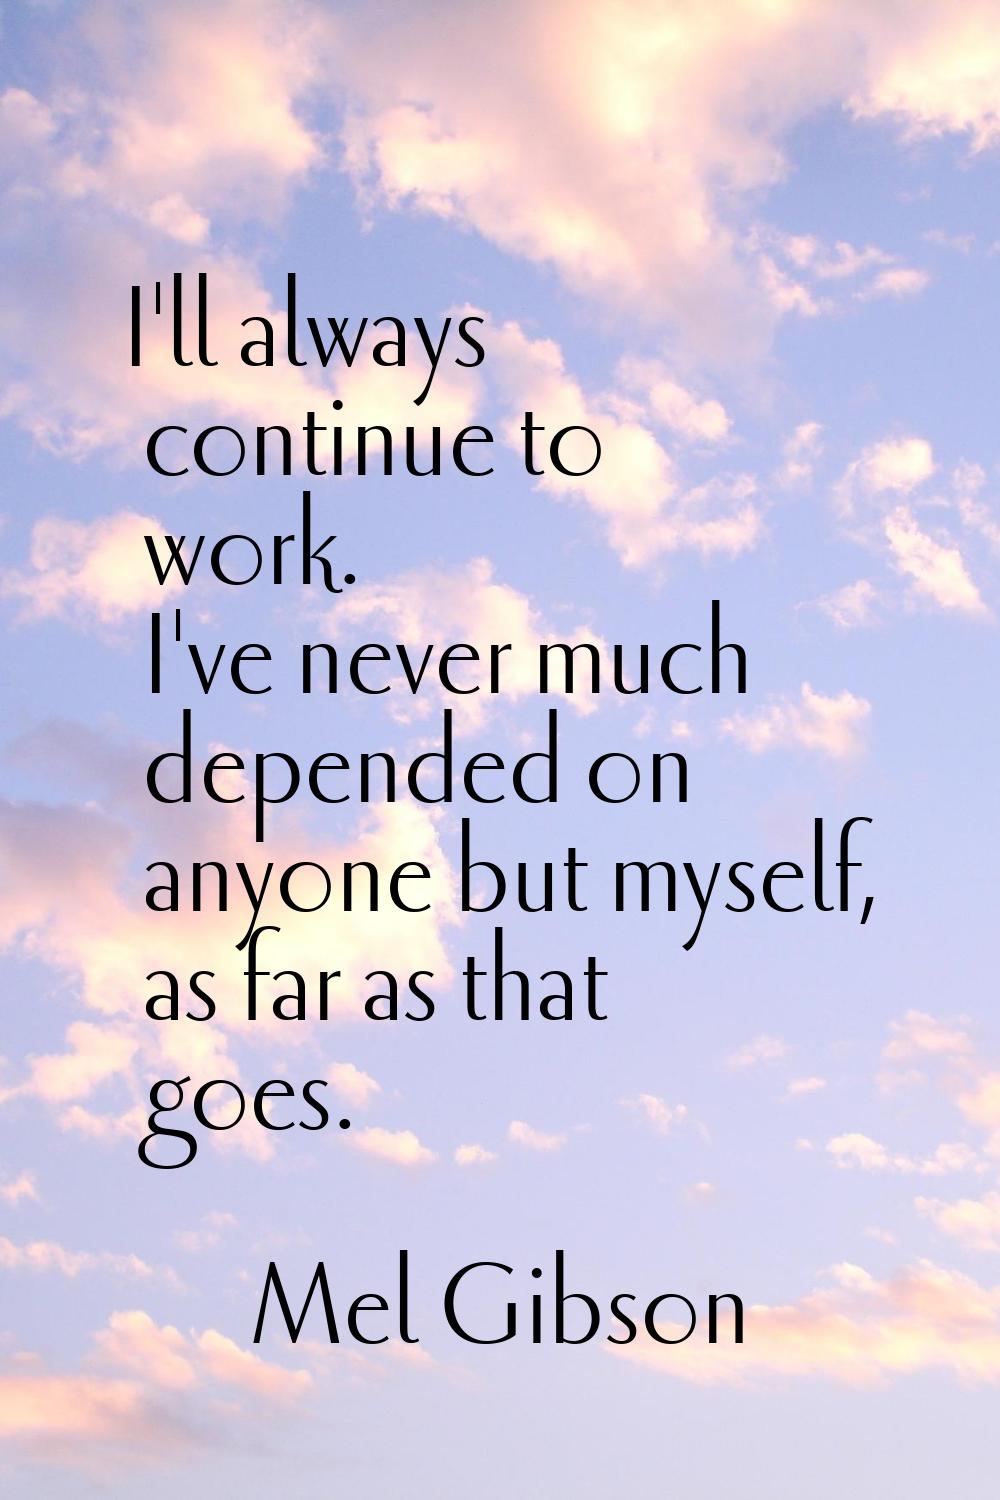 I'll always continue to work. I've never much depended on anyone but myself, as far as that goes.